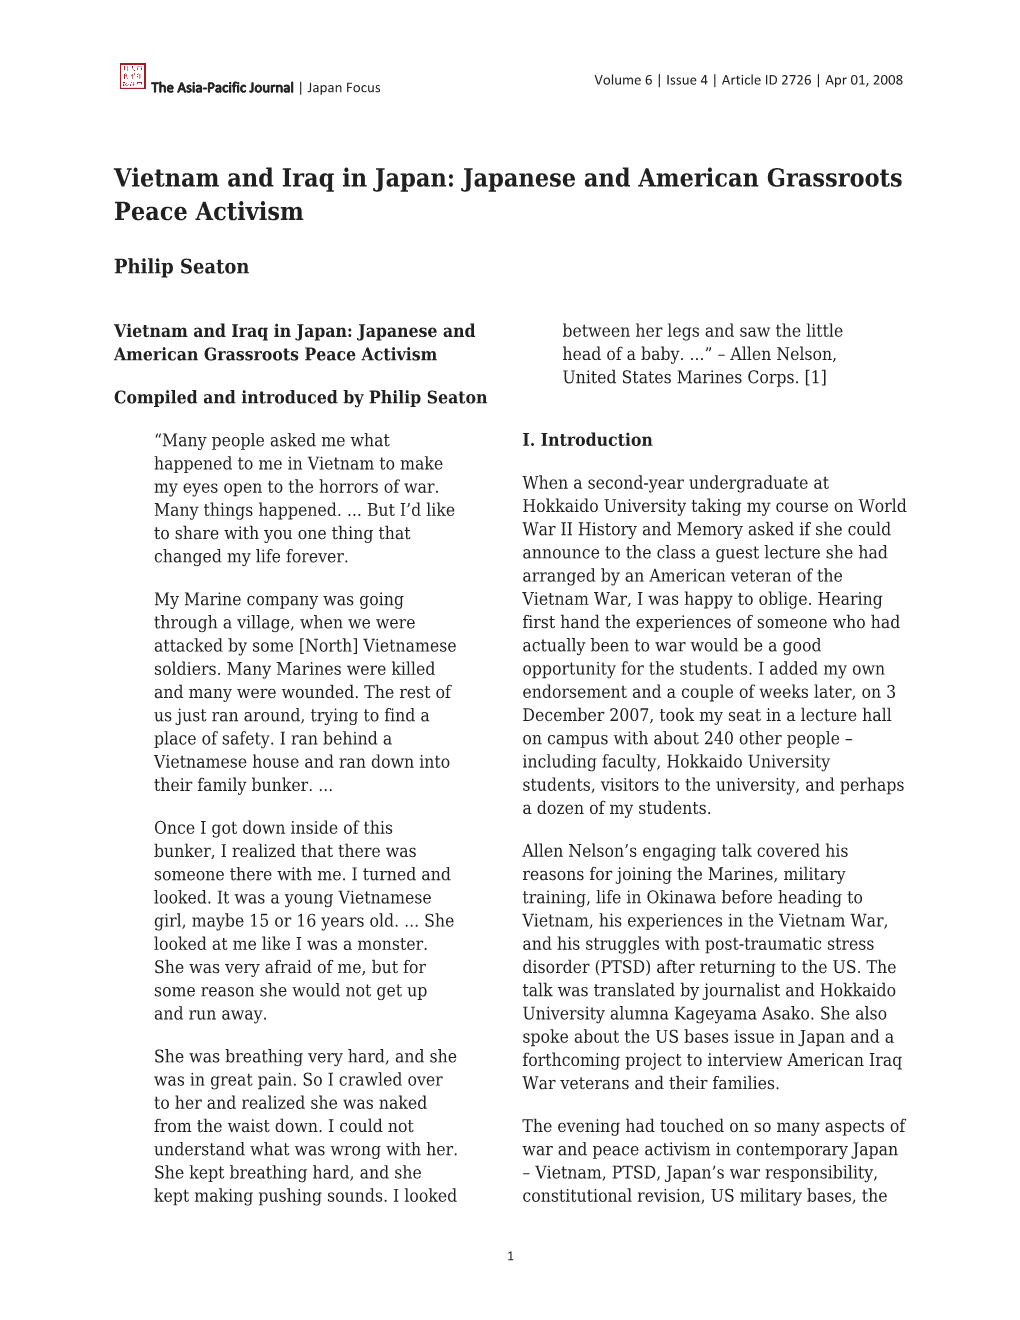 Japanese and American Grassroots Peace Activism